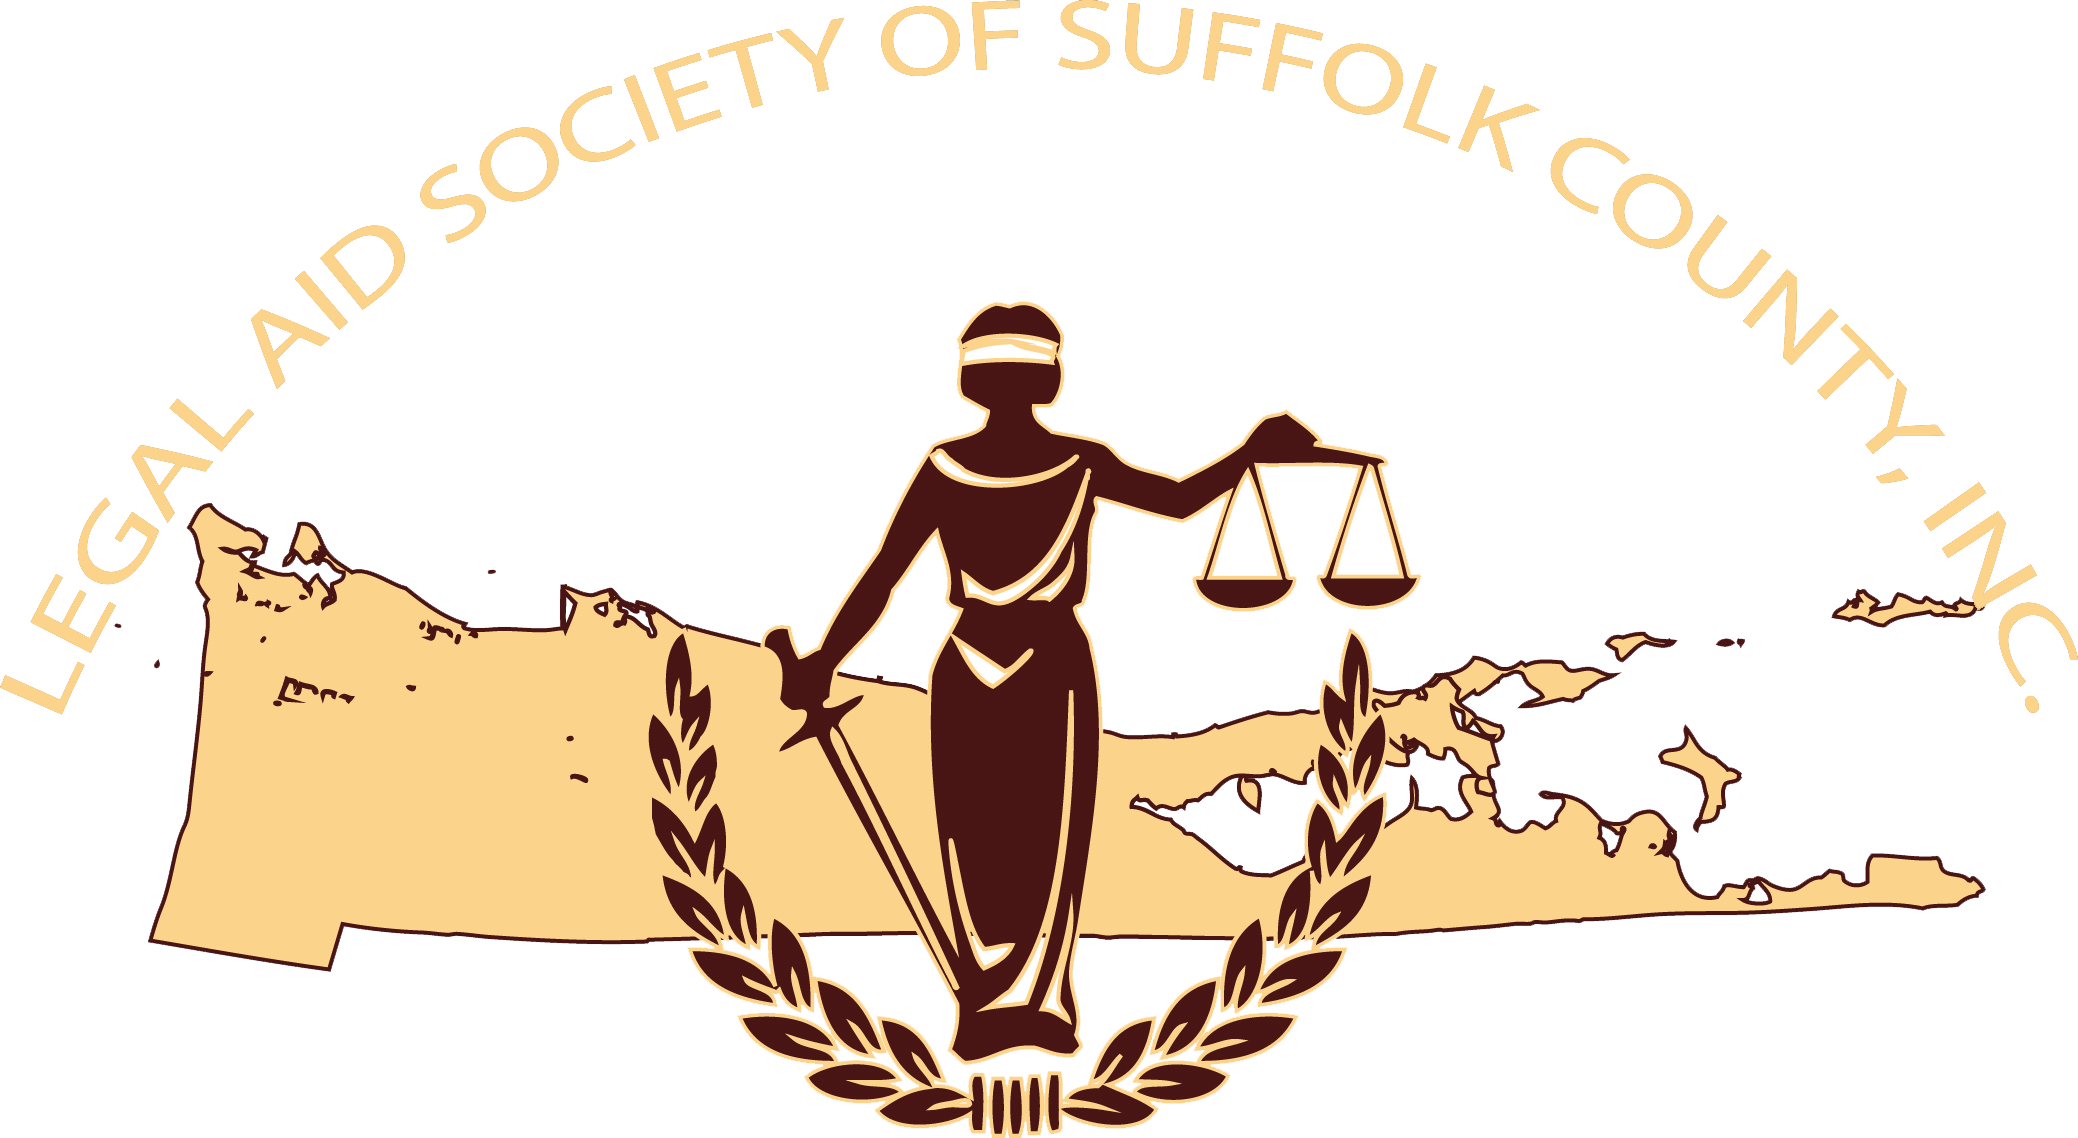 Image for "Legal Aid Society of Suffolk County logo"